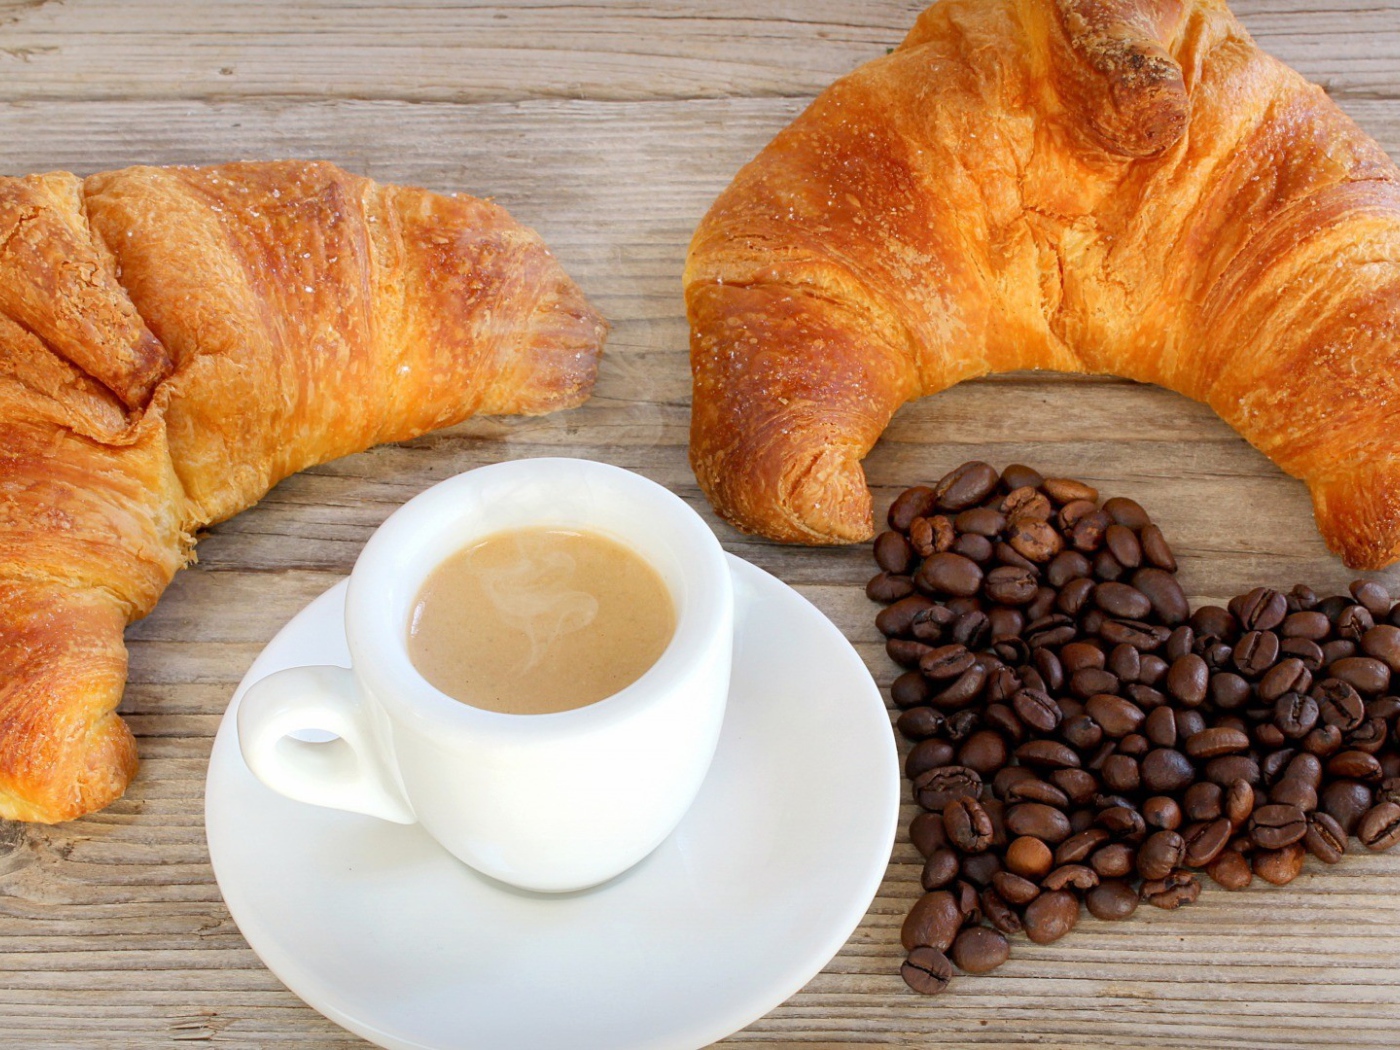 Two French croissant and a cup of coffee